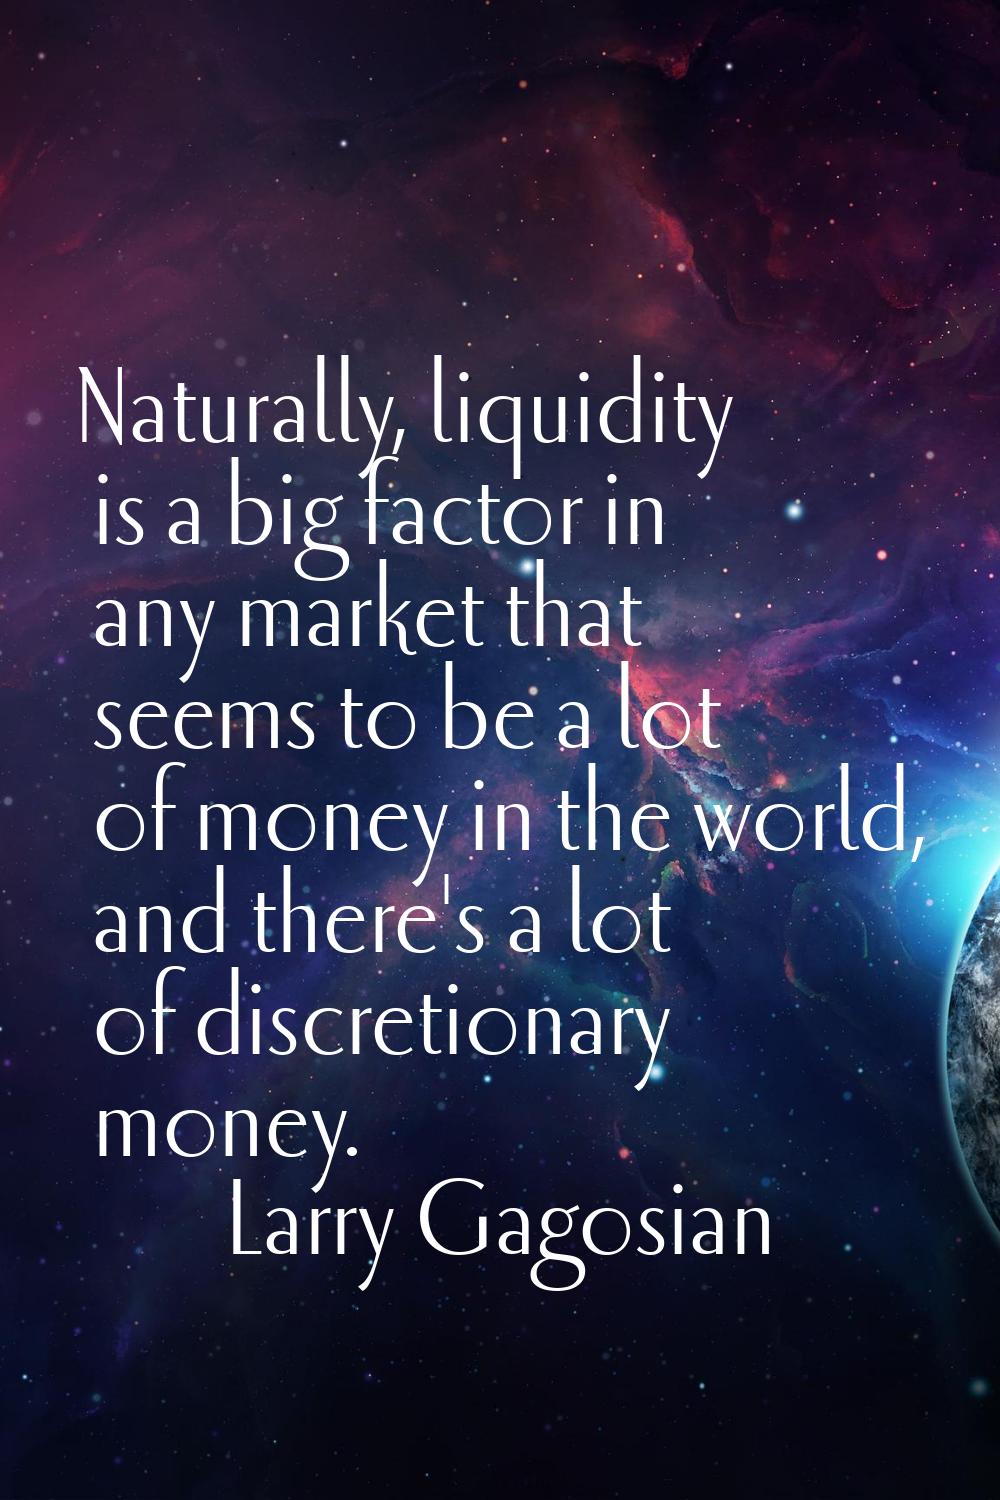 Naturally, liquidity is a big factor in any market that seems to be a lot of money in the world, an